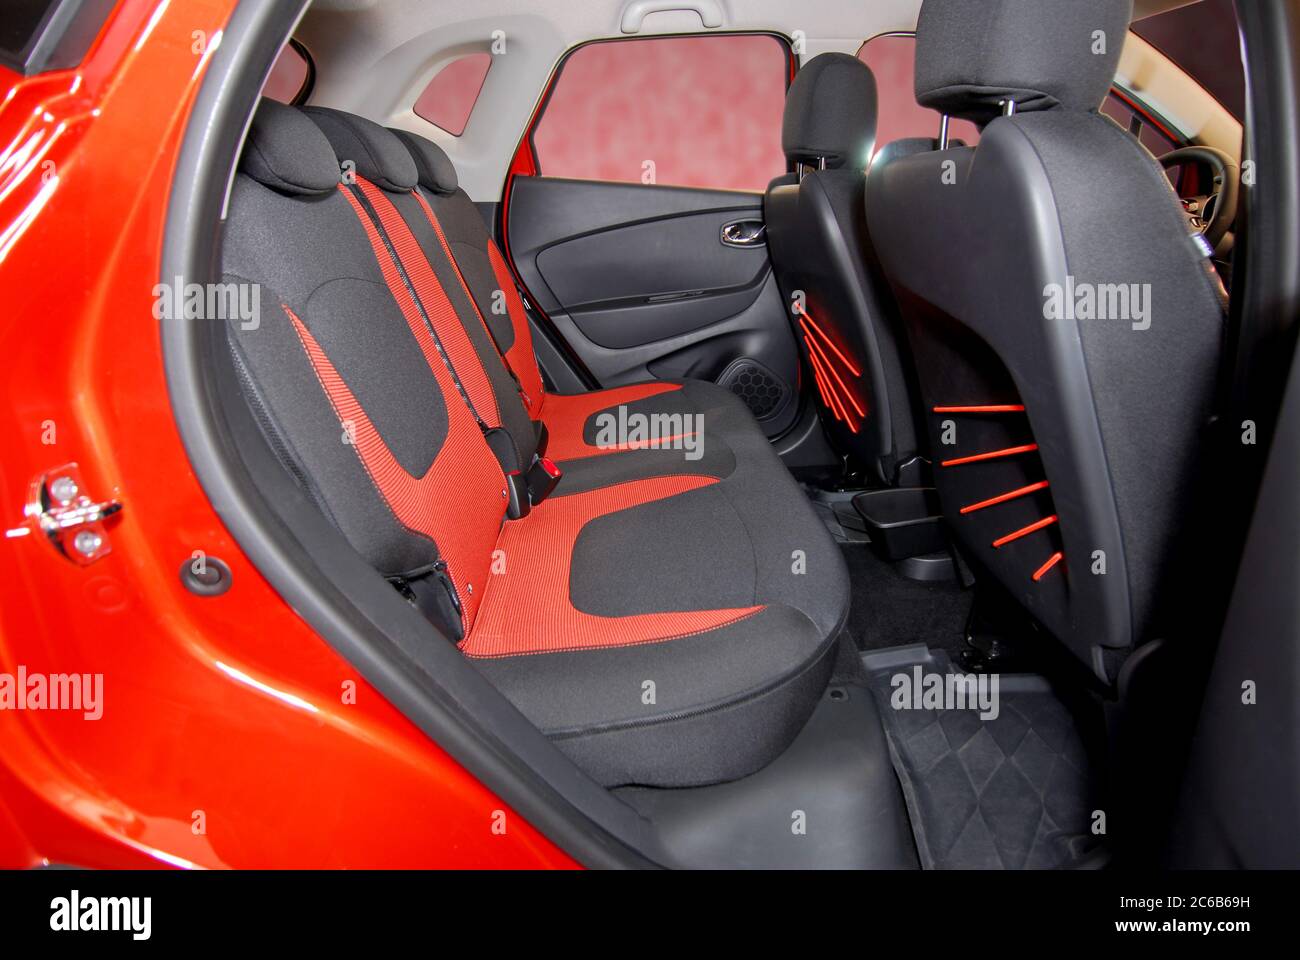 black rear seat in the passinger car Stock Photo